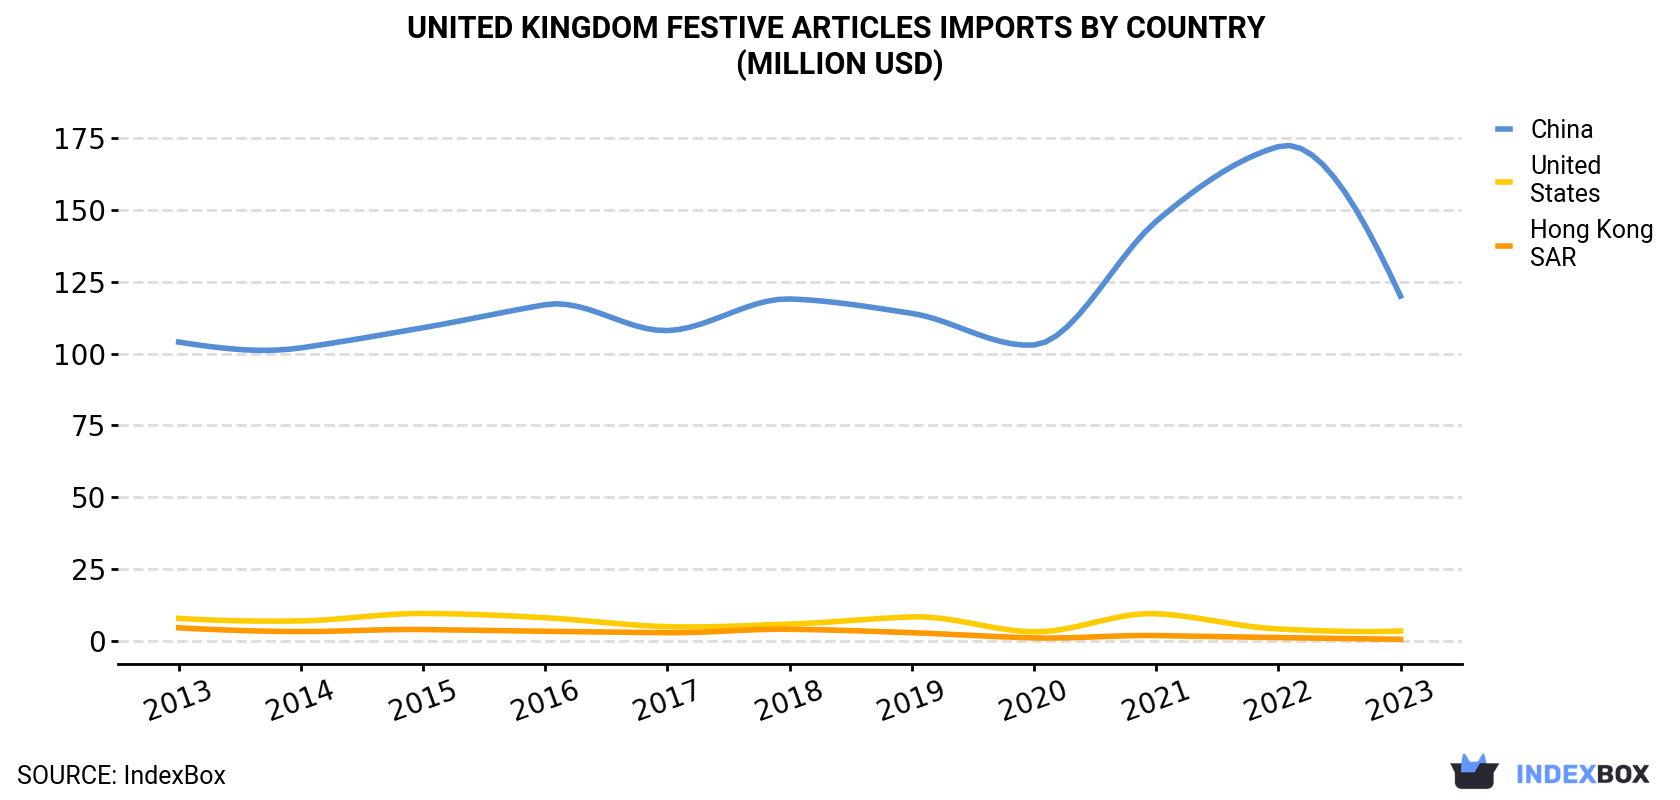 United Kingdom Festive Articles Imports By Country (Million USD)